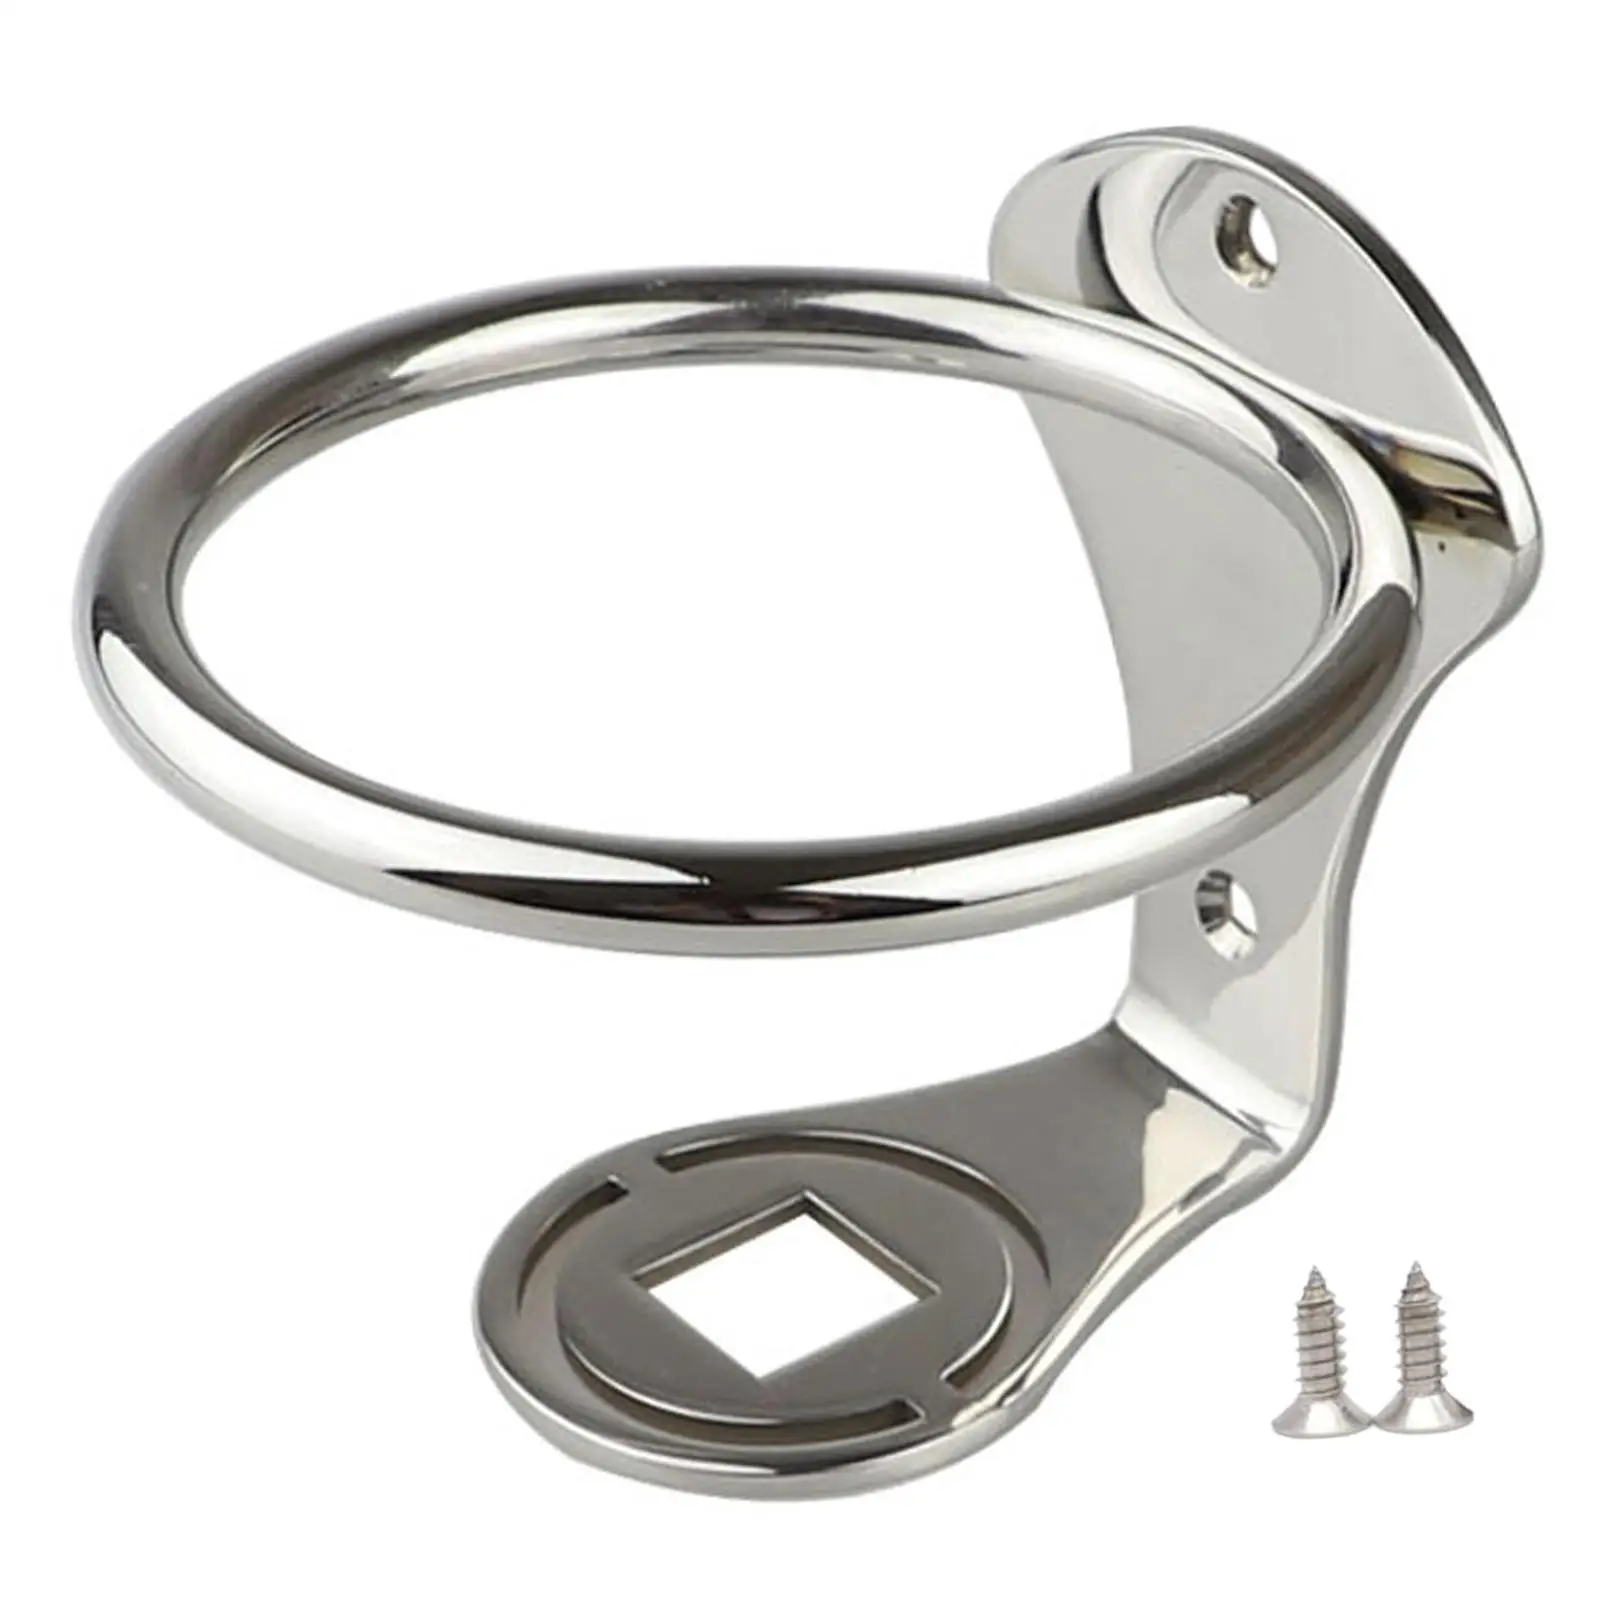 Stainless Steel Boat Drink Bottle Holder for Marine Cups